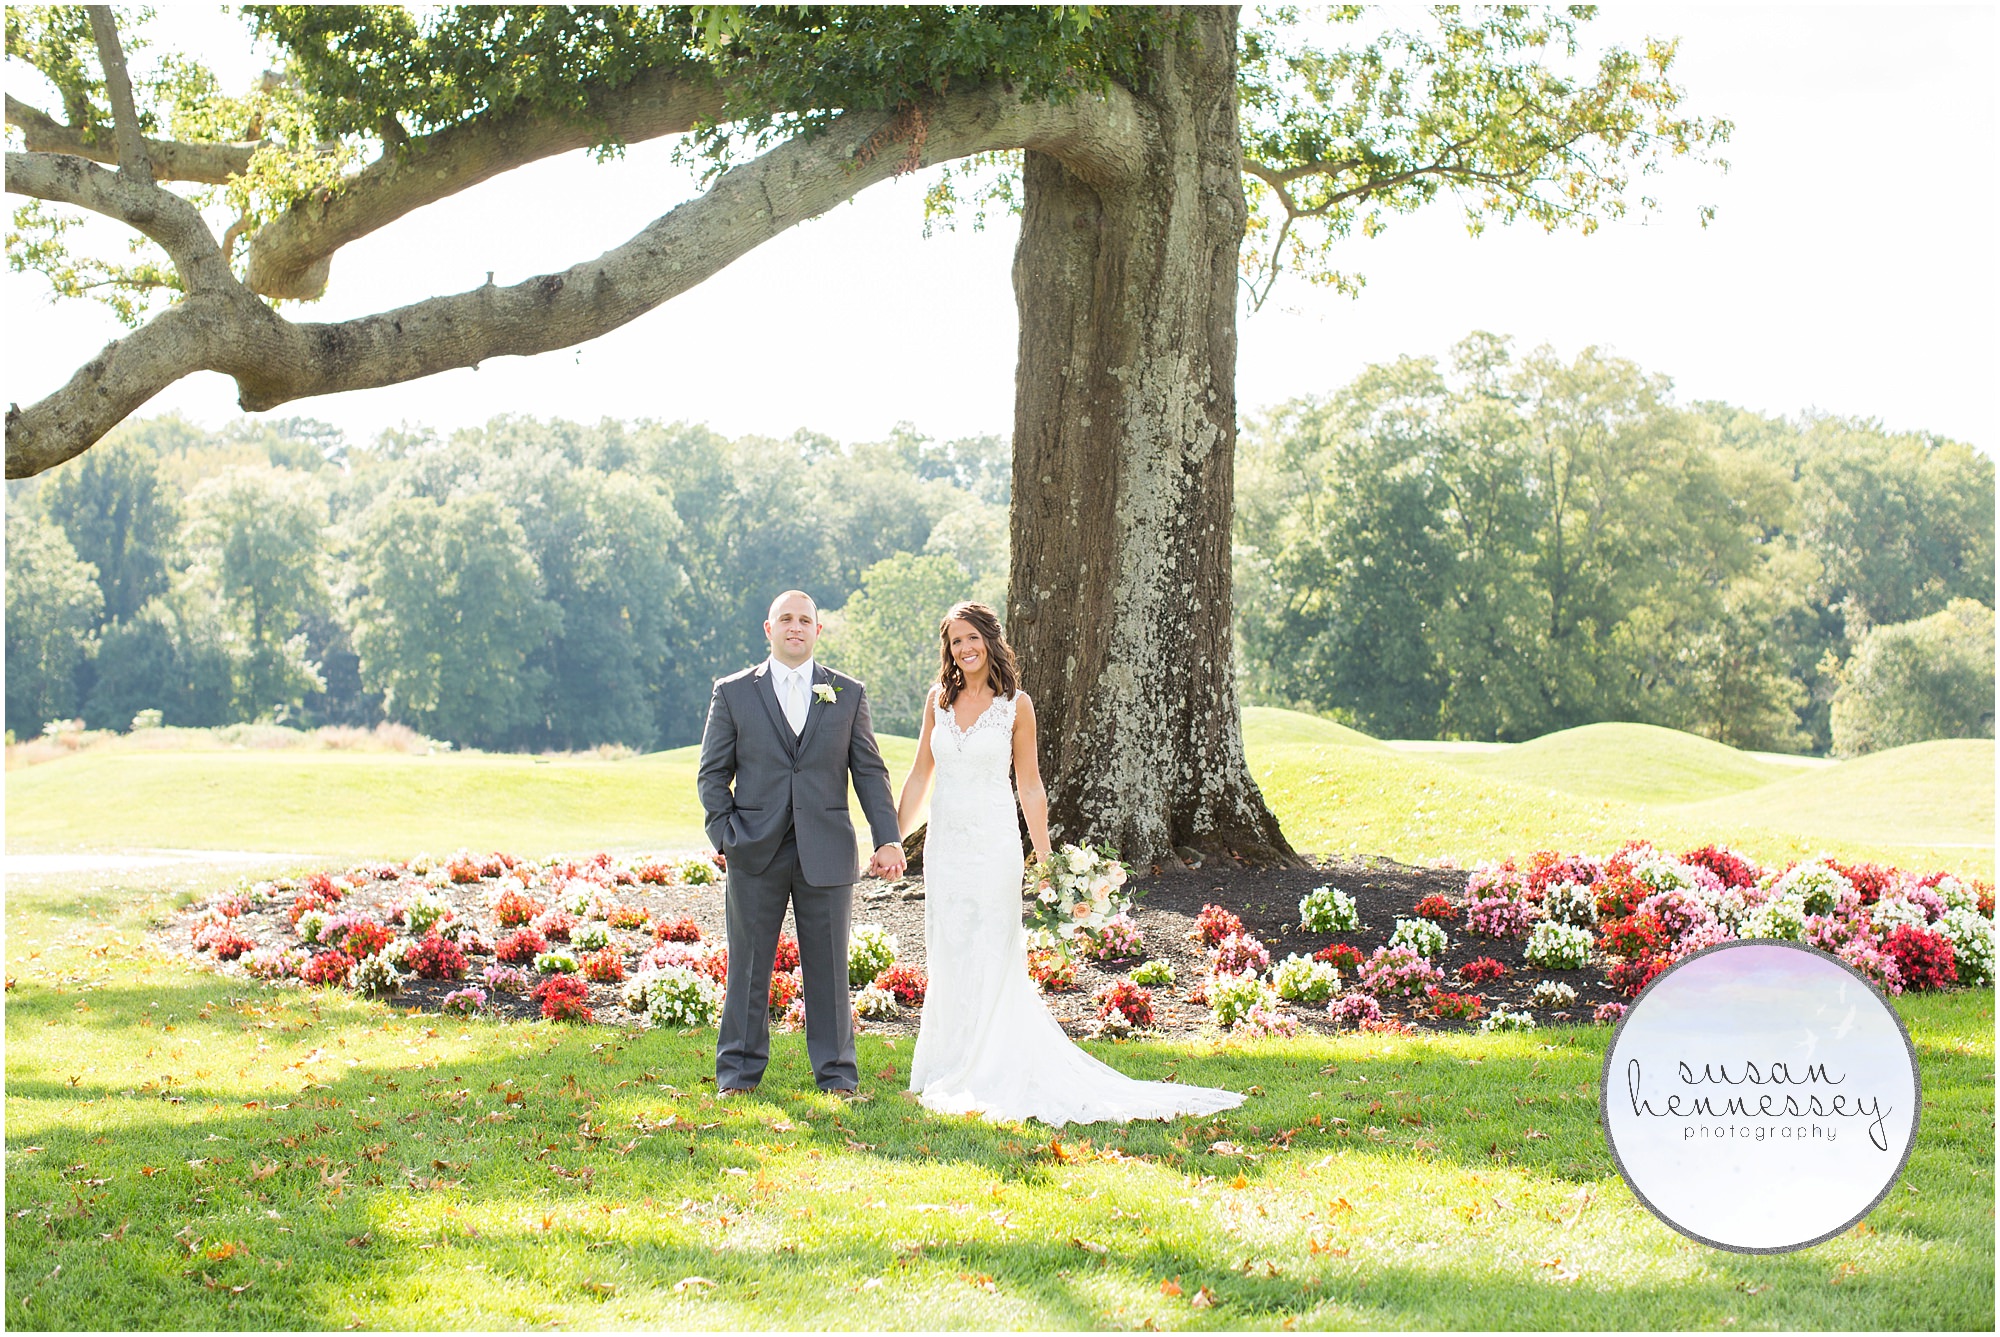 Couple on their wedding day at Old York Country Club in Chesterfield, NJ